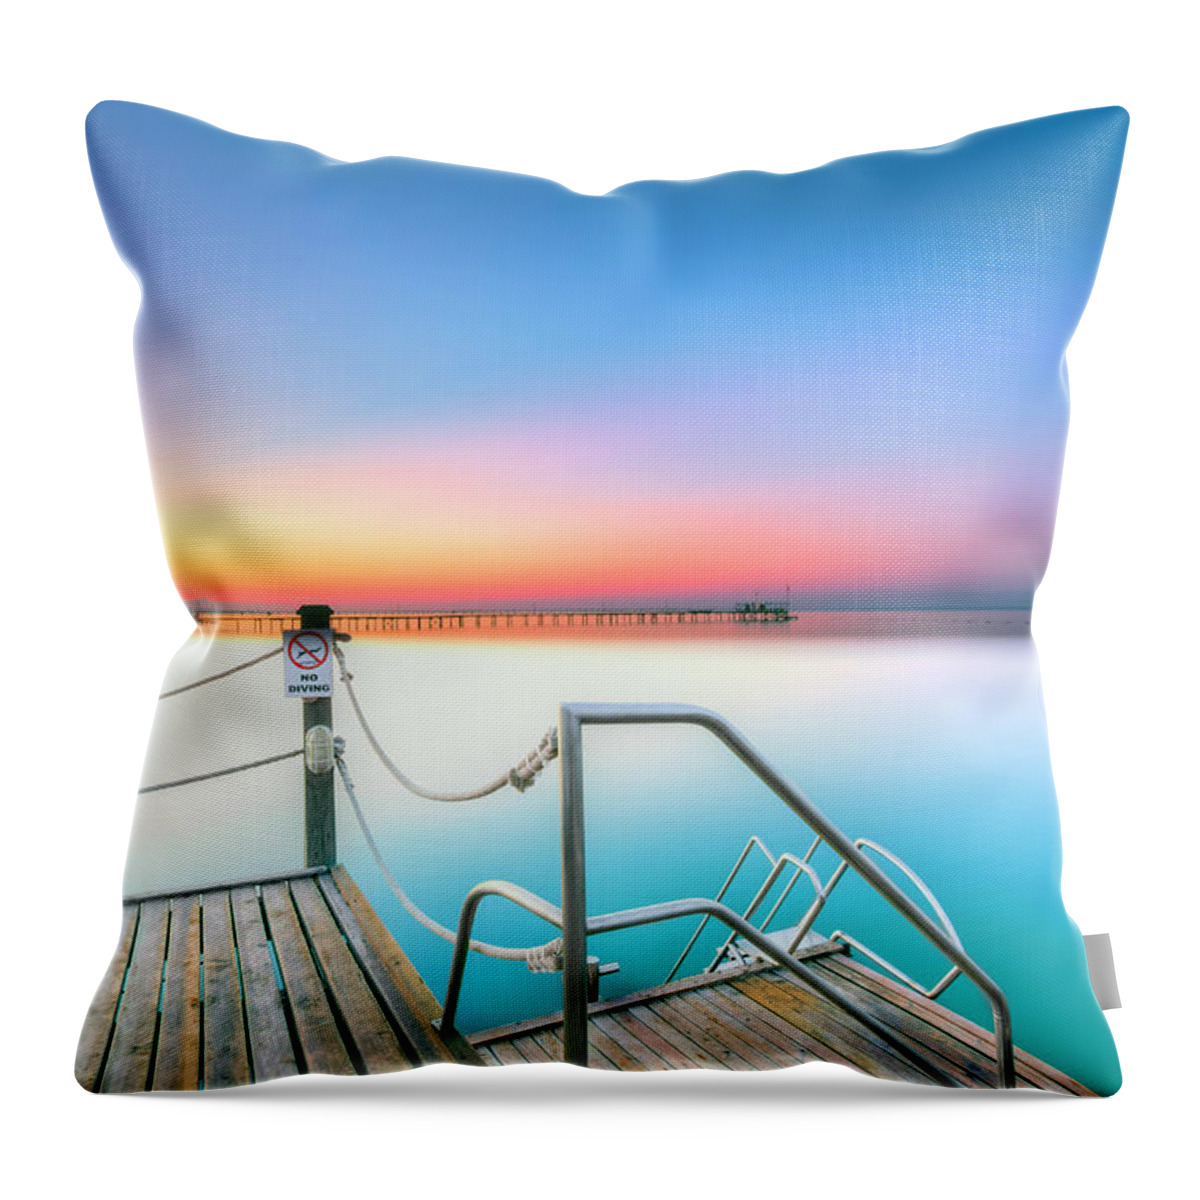 Sunrise Throw Pillow featuring the photograph Sunrise Over Tranquil Waters by Nadia Sanowar